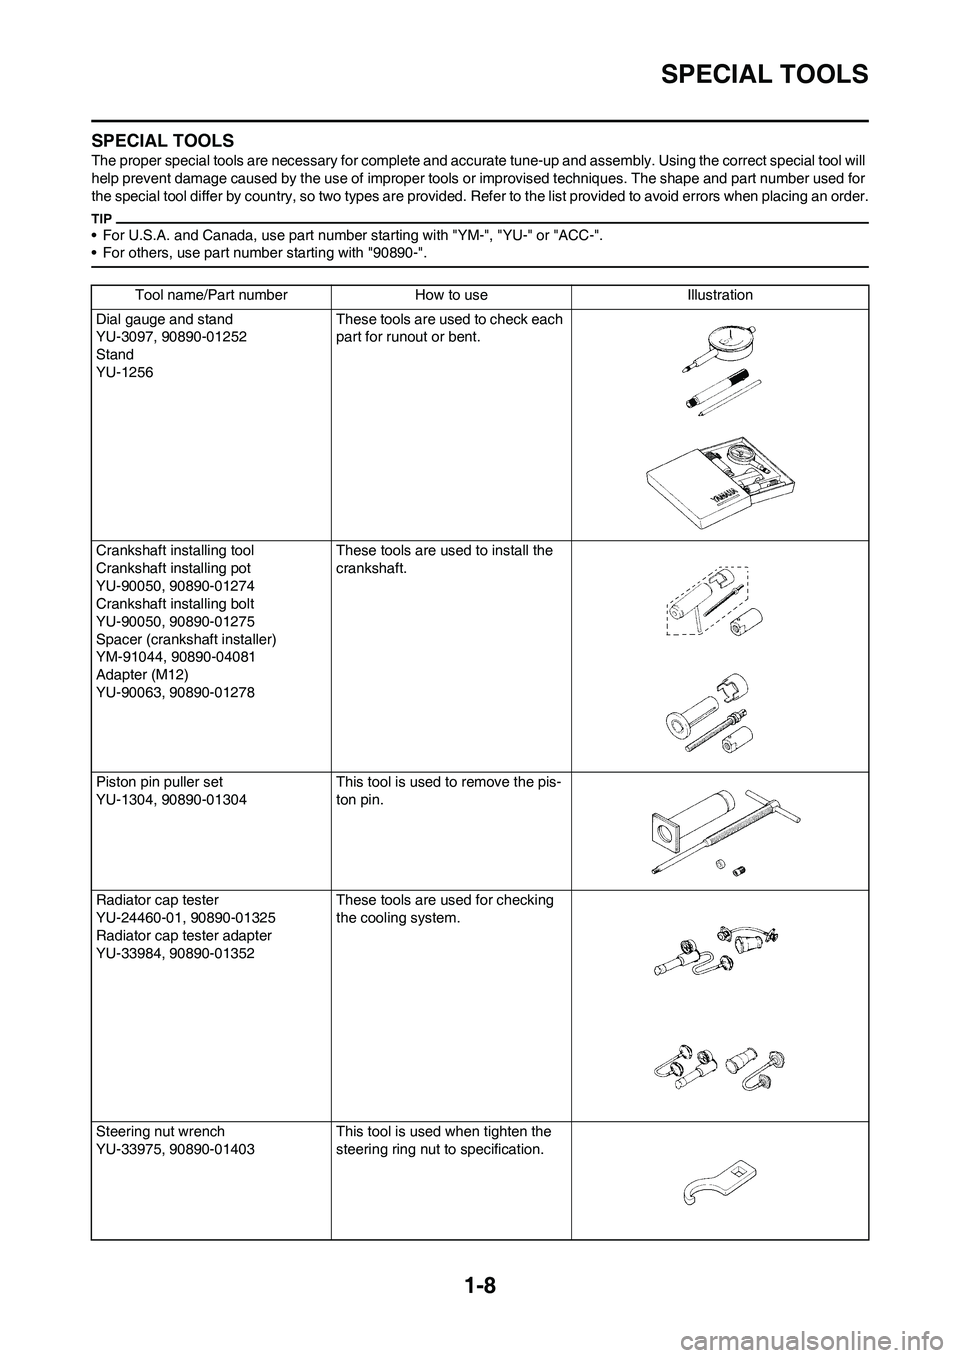 YAMAHA WR 450F 2011  Owners Manual 
1-8
SPECIAL TOOLS
SPECIAL TOOLS
The proper special tools are necessary for complete and accurate tune-up and assembly. Using the correct special tool will 
help prevent damage caused by the use of  i